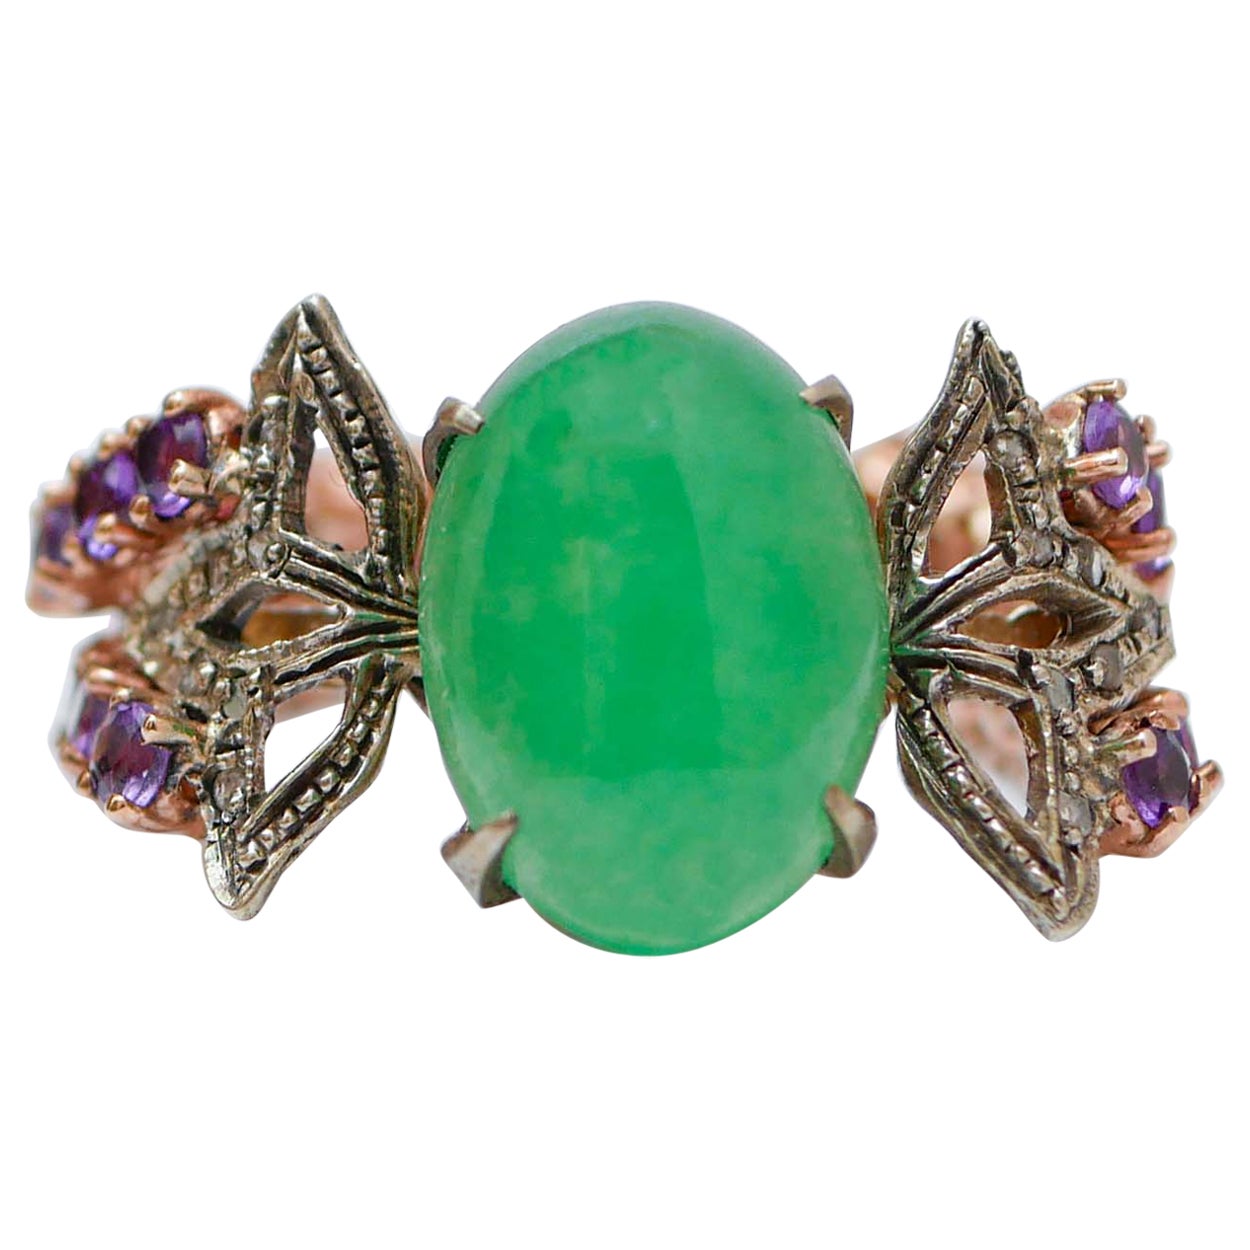 Jade, Amethysts, Diamonds, Rose Gold and Silver Ring.